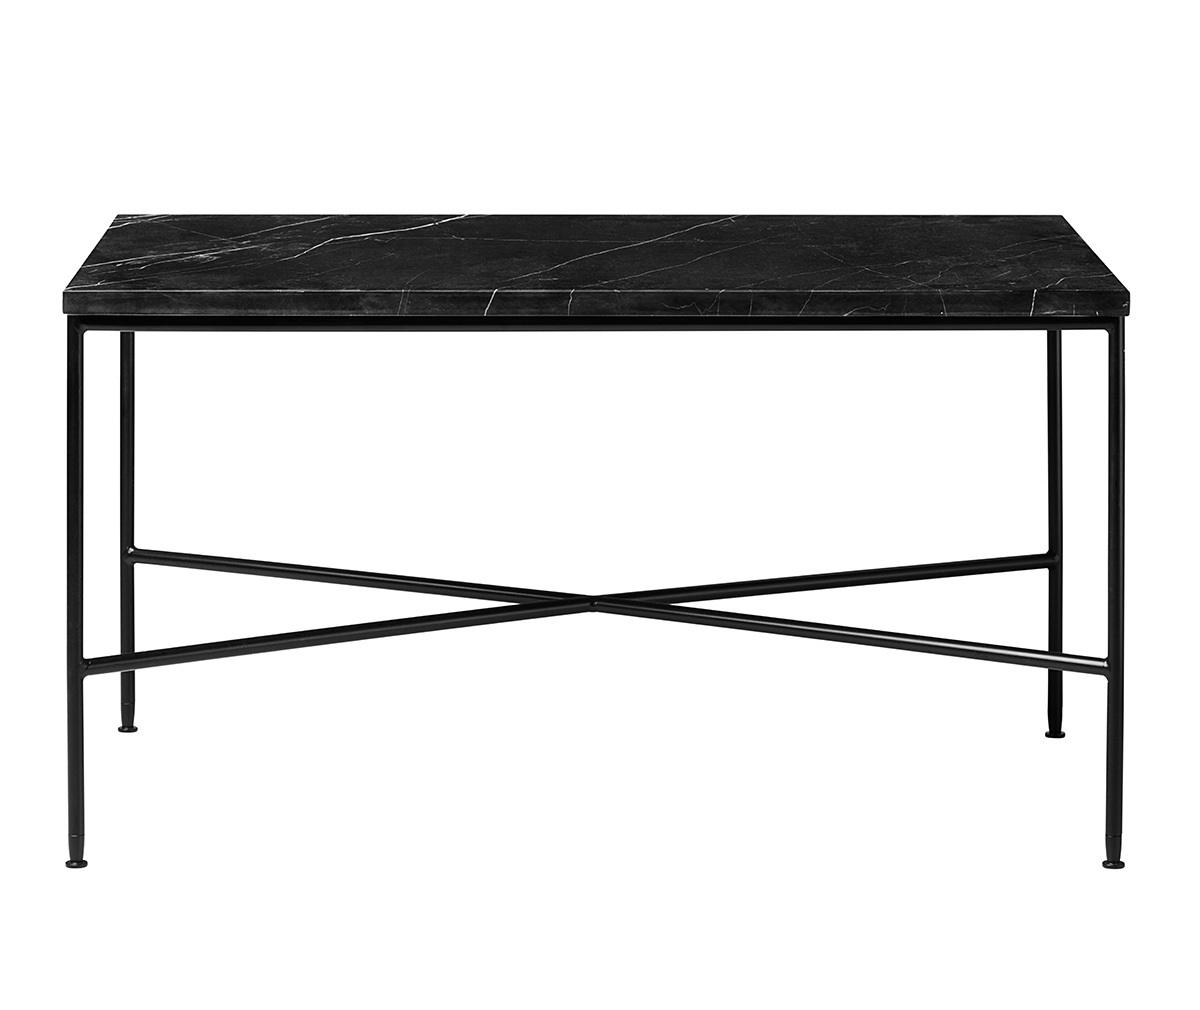 Fritz Hansen Planner Coffee Table Charcoal Marble, 75 x 45 cm